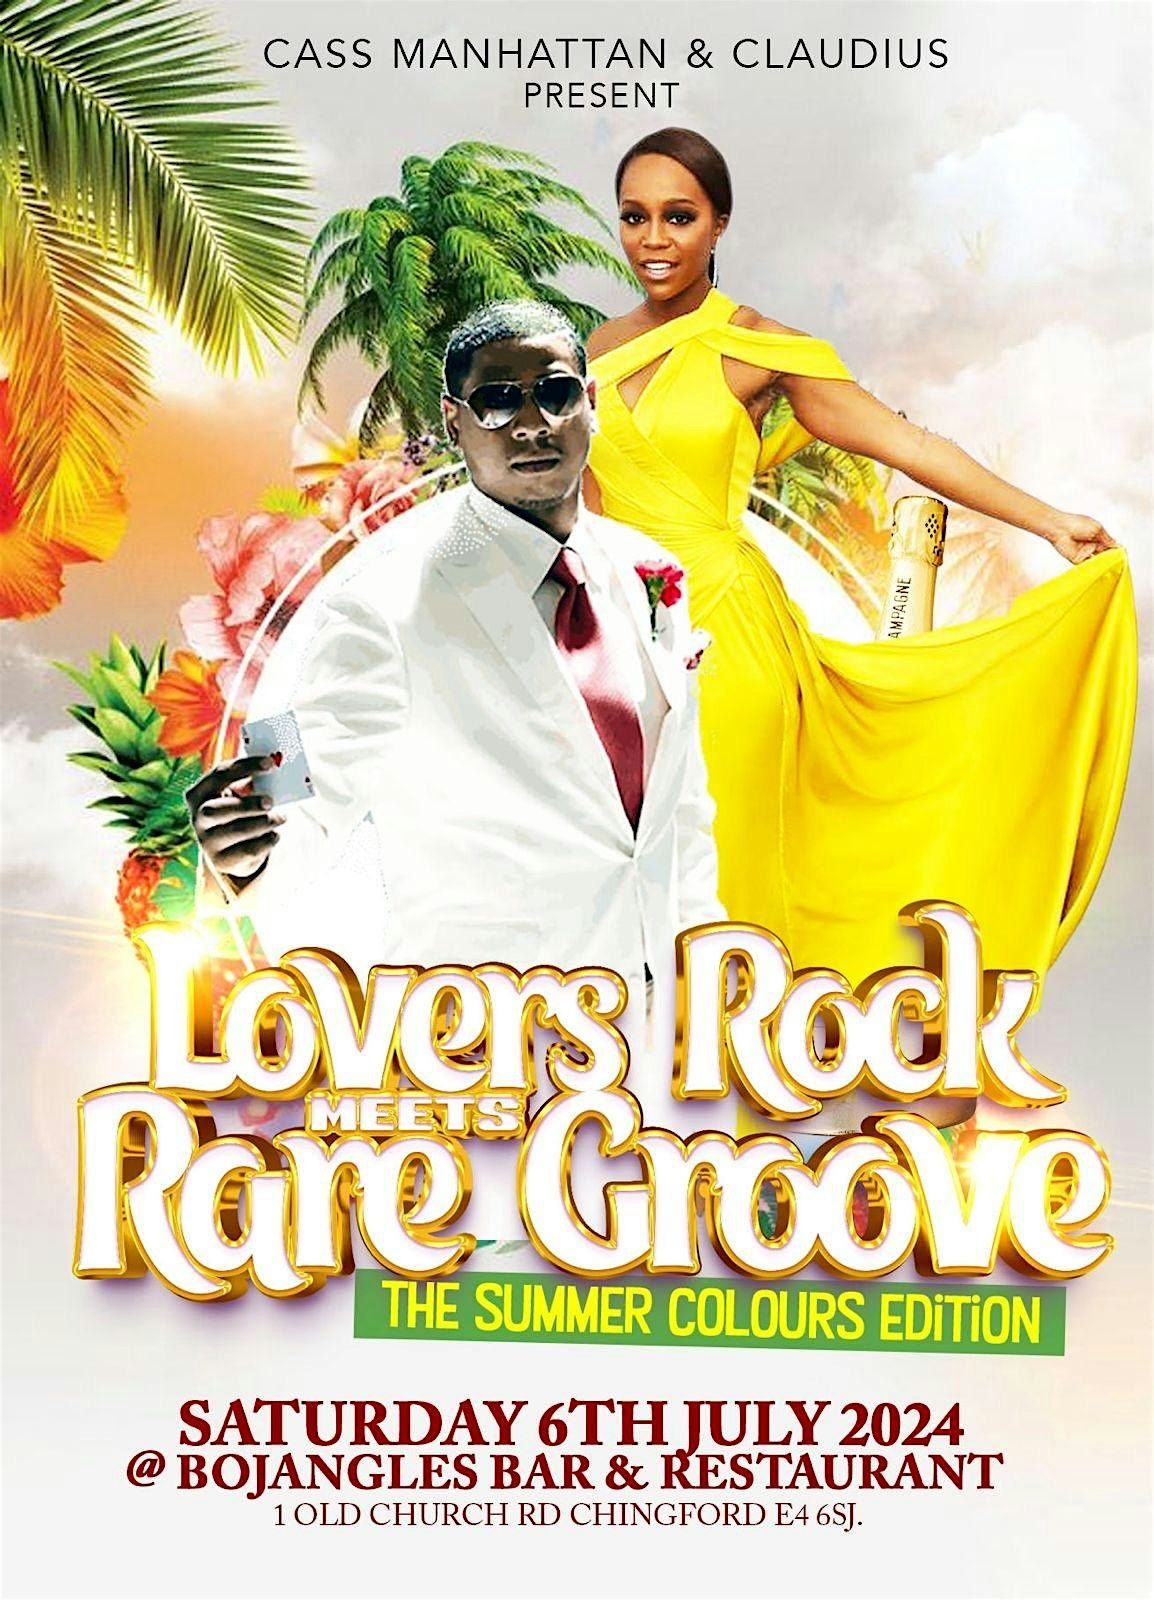 LOVERS ROCK MEETS RARE GROOVE THE SUMMER COLOURS EDITION